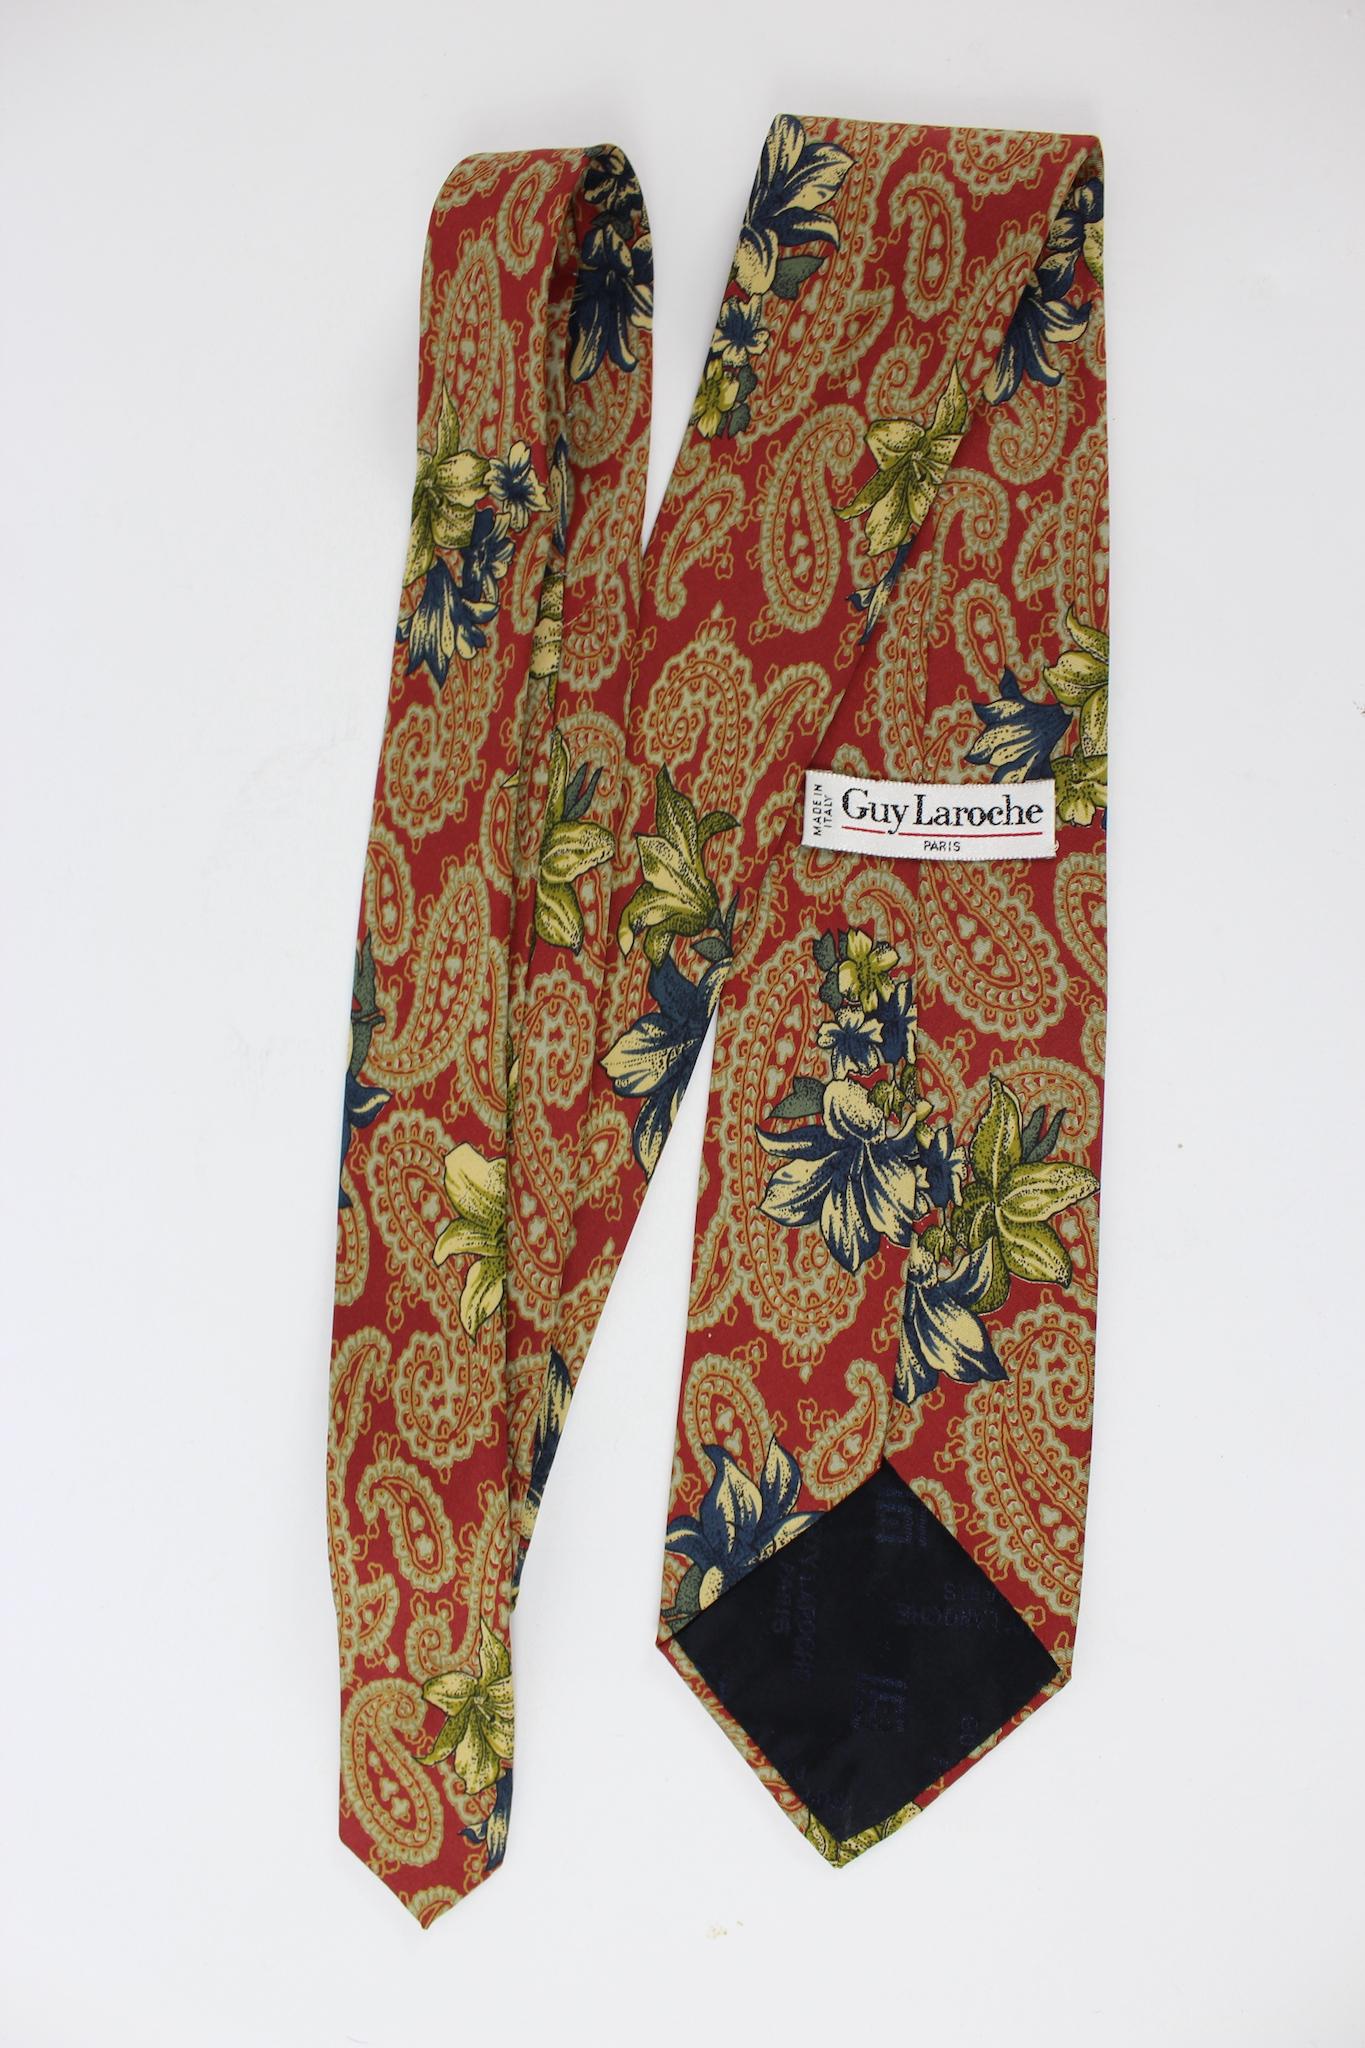 Guy Laroche 80s vintage floral tie. Red, beige and blue color with paisley and floral designs. 100% silk. Made in Italy.

Length: 150 cm
Length: 9 cm